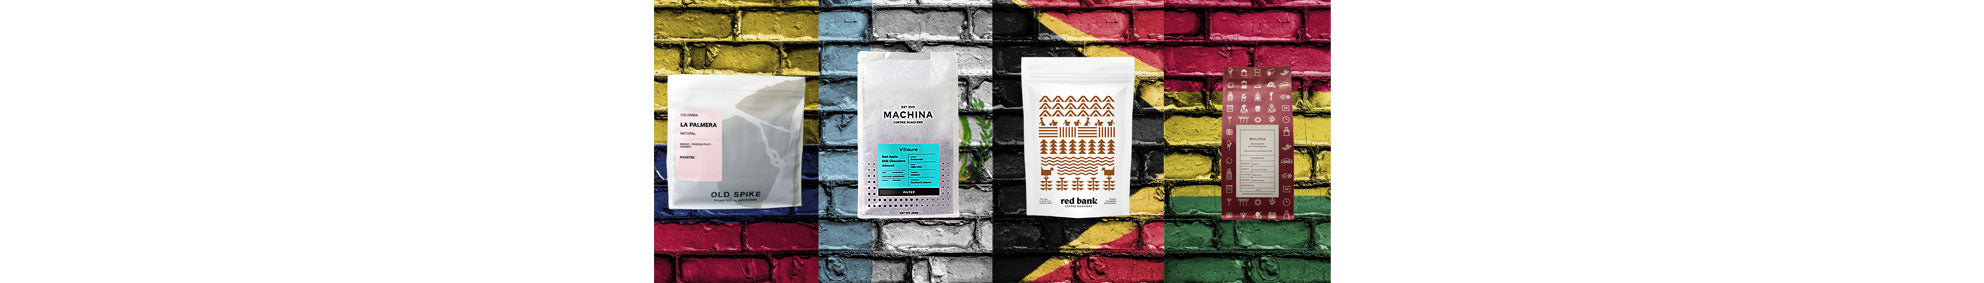 April Edition of the UK Best Coffee Subscription